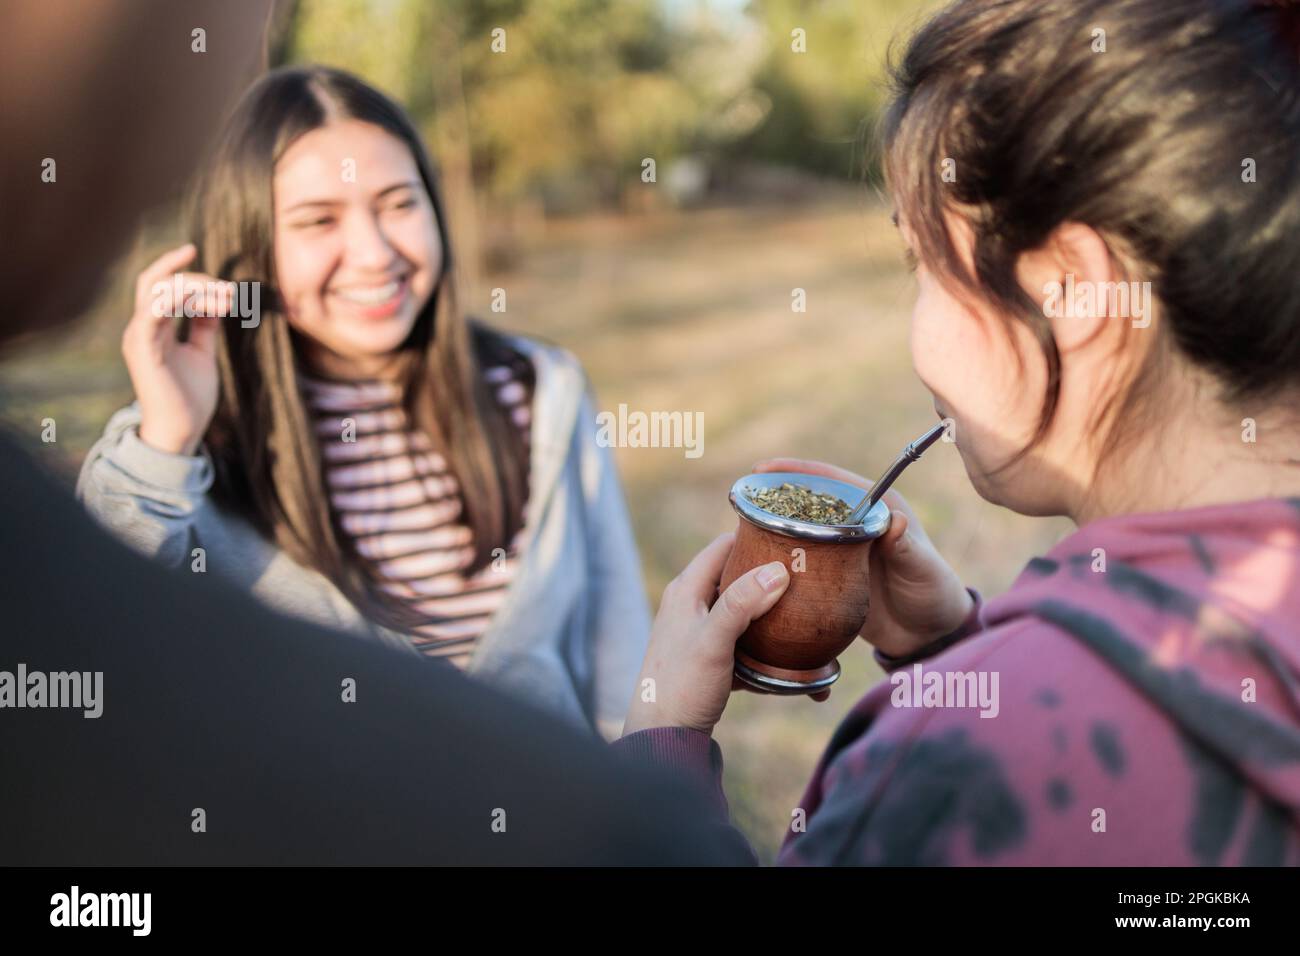 https://c8.alamy.com/comp/2PGKBKA/group-of-smiling-friends-drinking-yerba-mate-using-a-thermo-with-hot-water-in-the-countryside-at-sunset-2PGKBKA.jpg